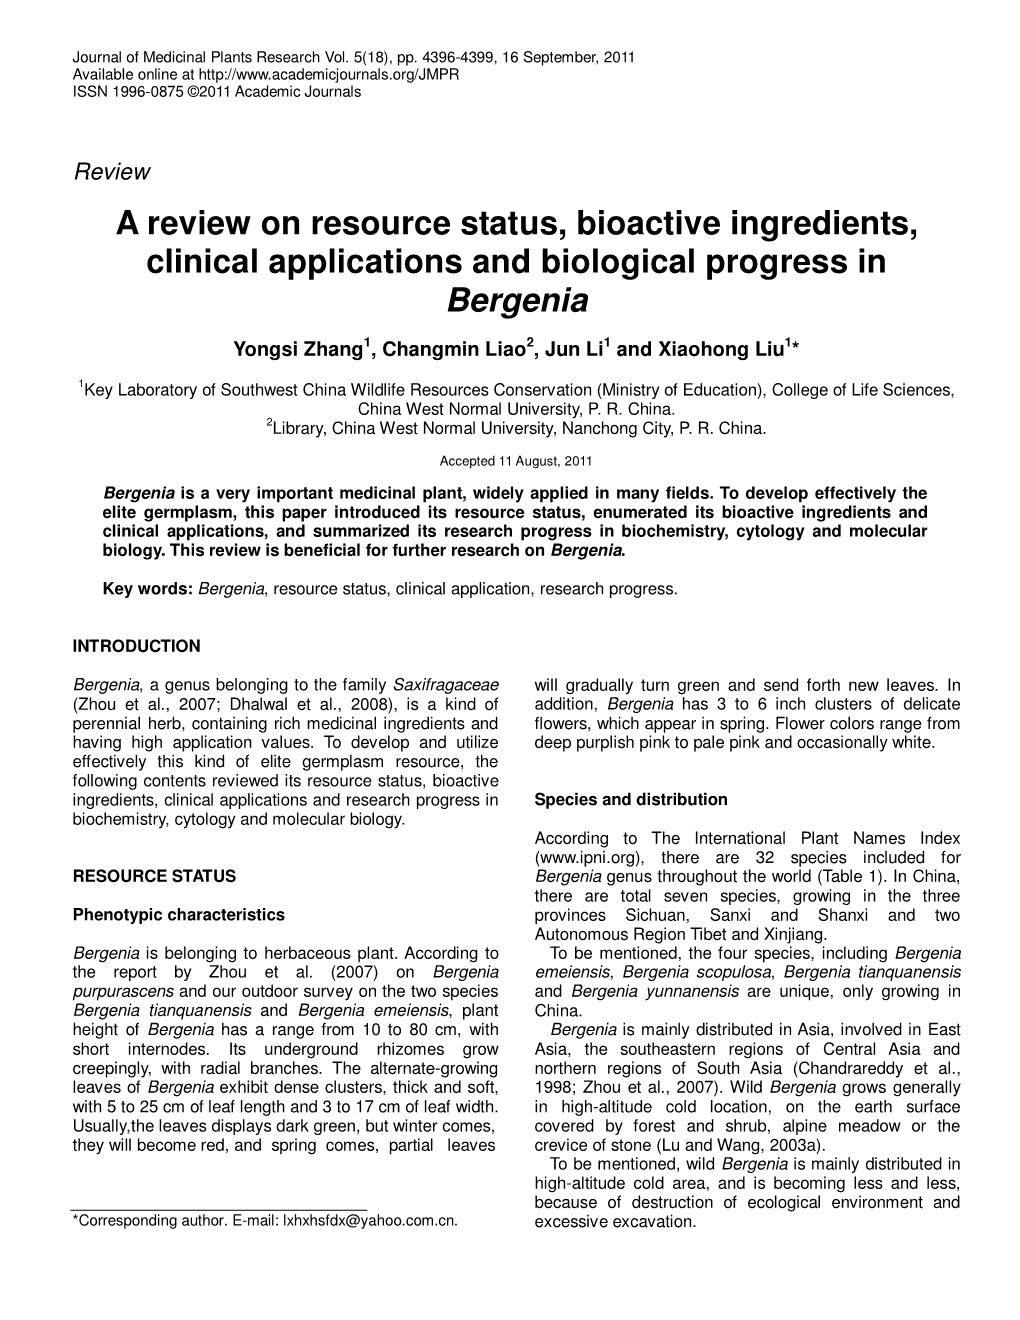 A Review on Resource Status, Bioactive Ingredients, Clinical Applications and Biological Progress in Bergenia